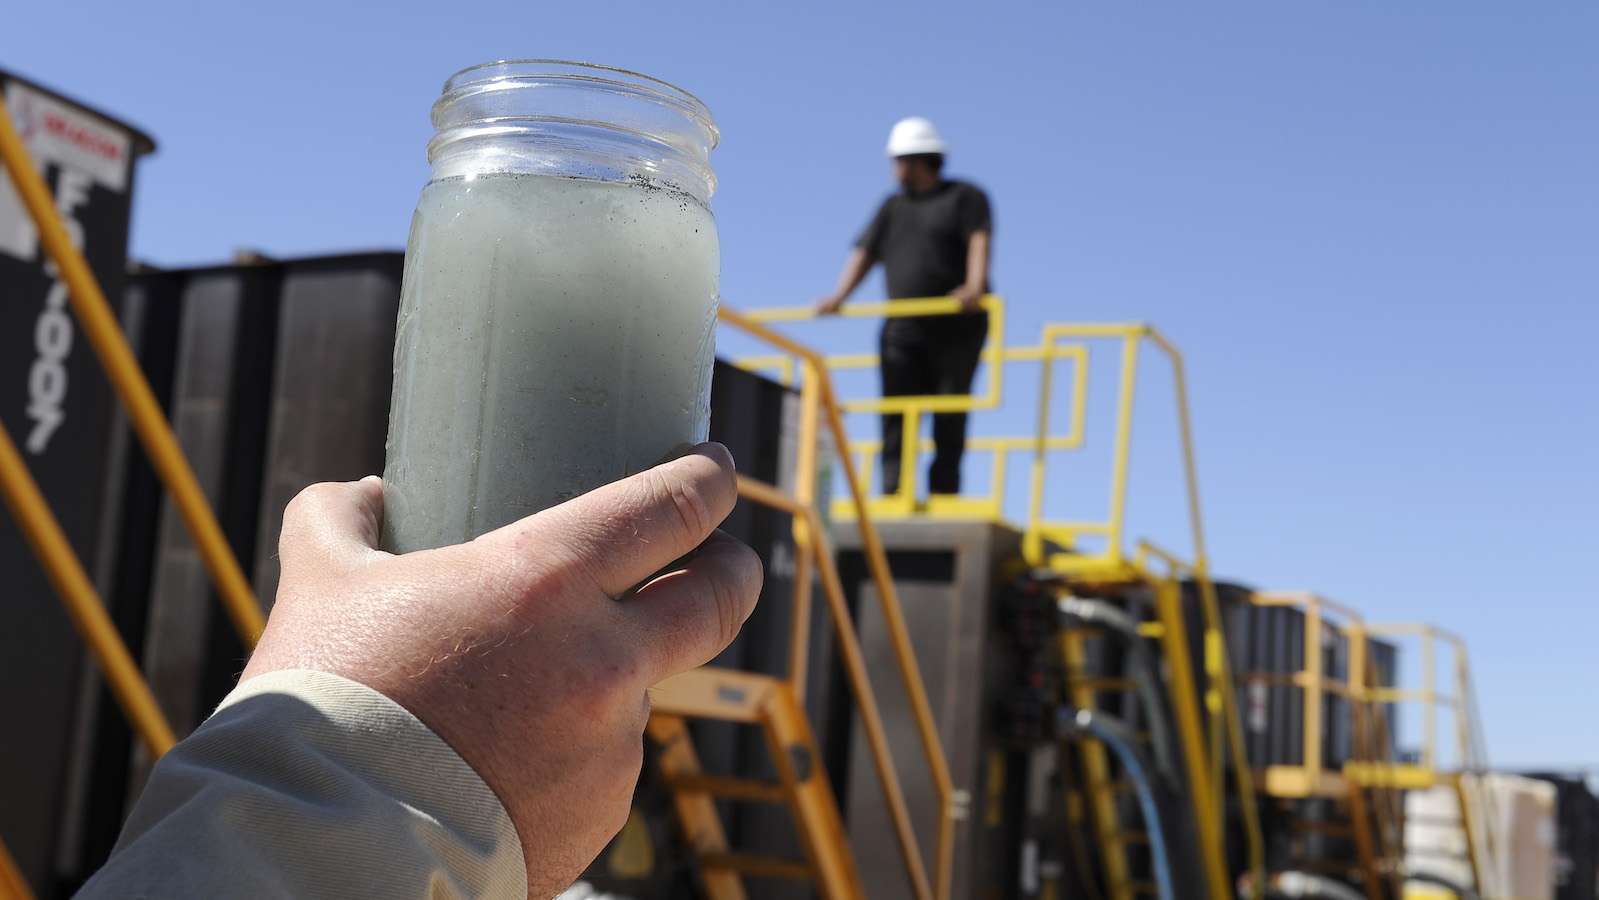 A jar holding grayish waste water from hydraulic fracturing is held up to the light at a recycling site.